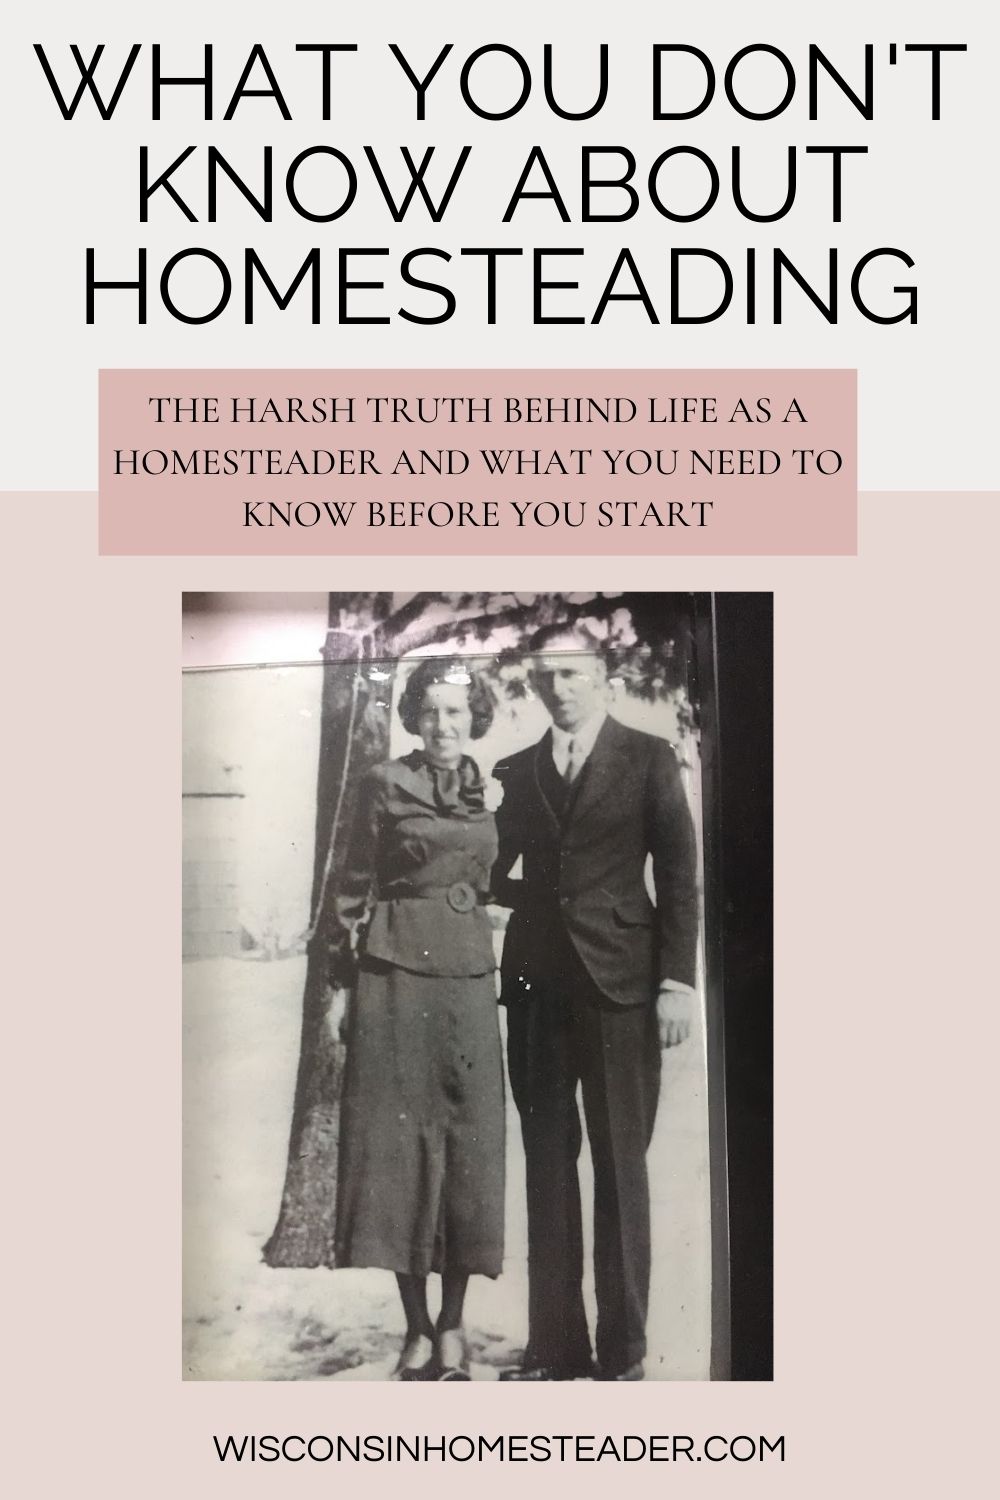 What you don't know about homesteading